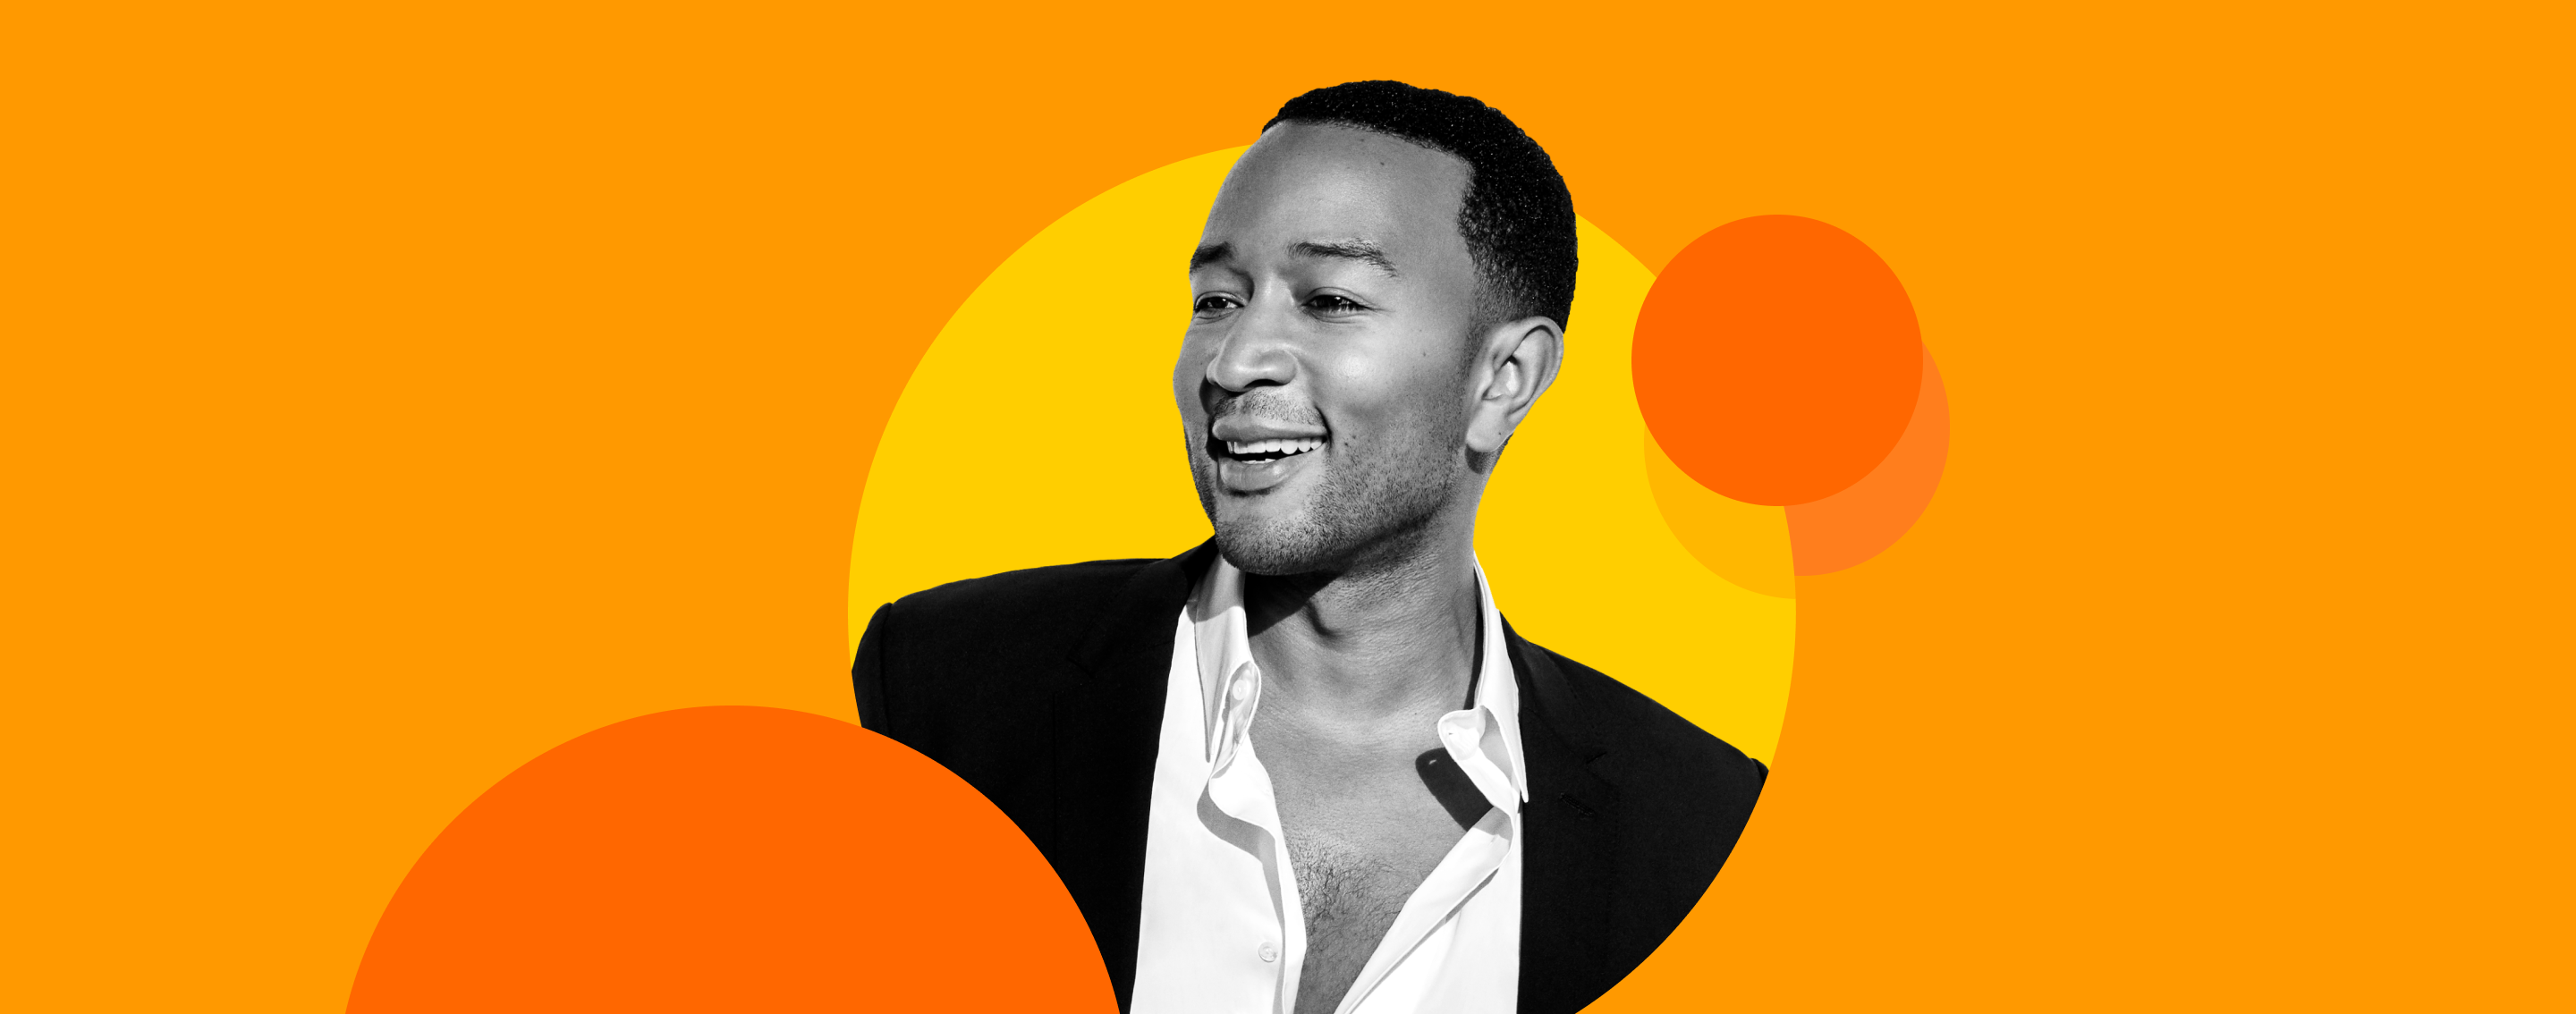 John Legend joins the Headspace team as Chief Music Officer